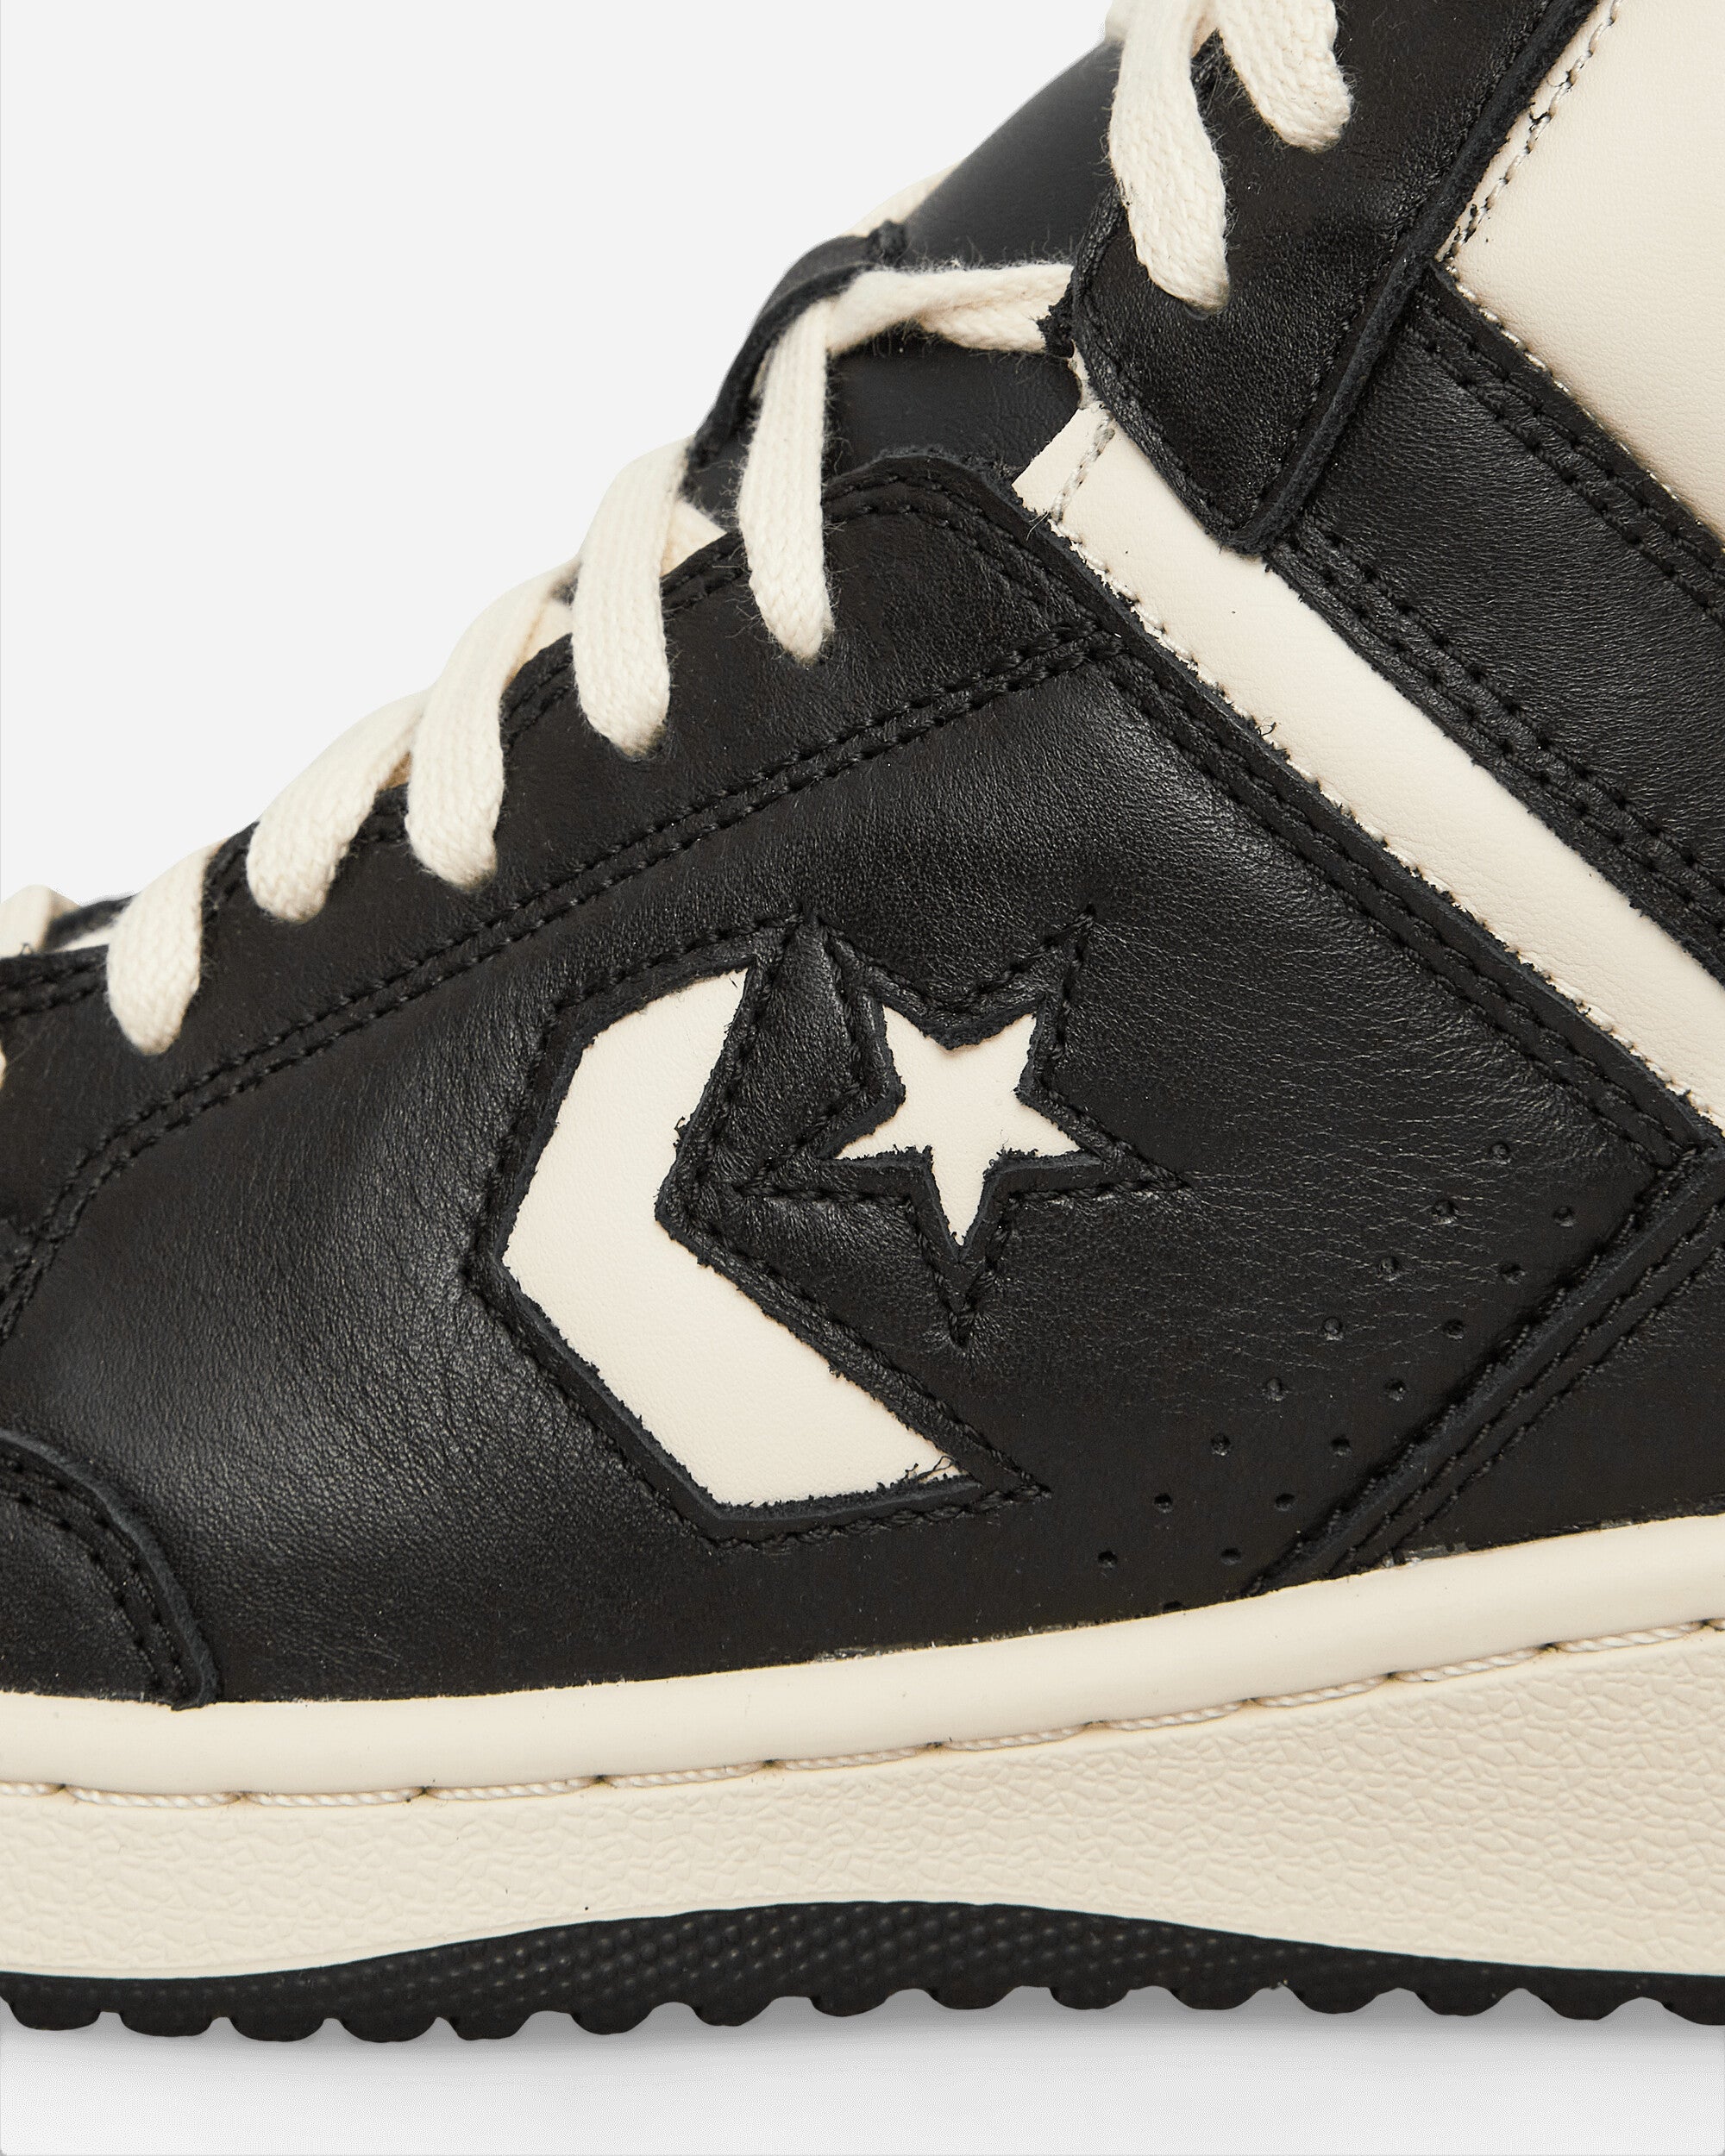 Converse Weapon Black/Natural Ivory/Black Sneakers Mid A04400C